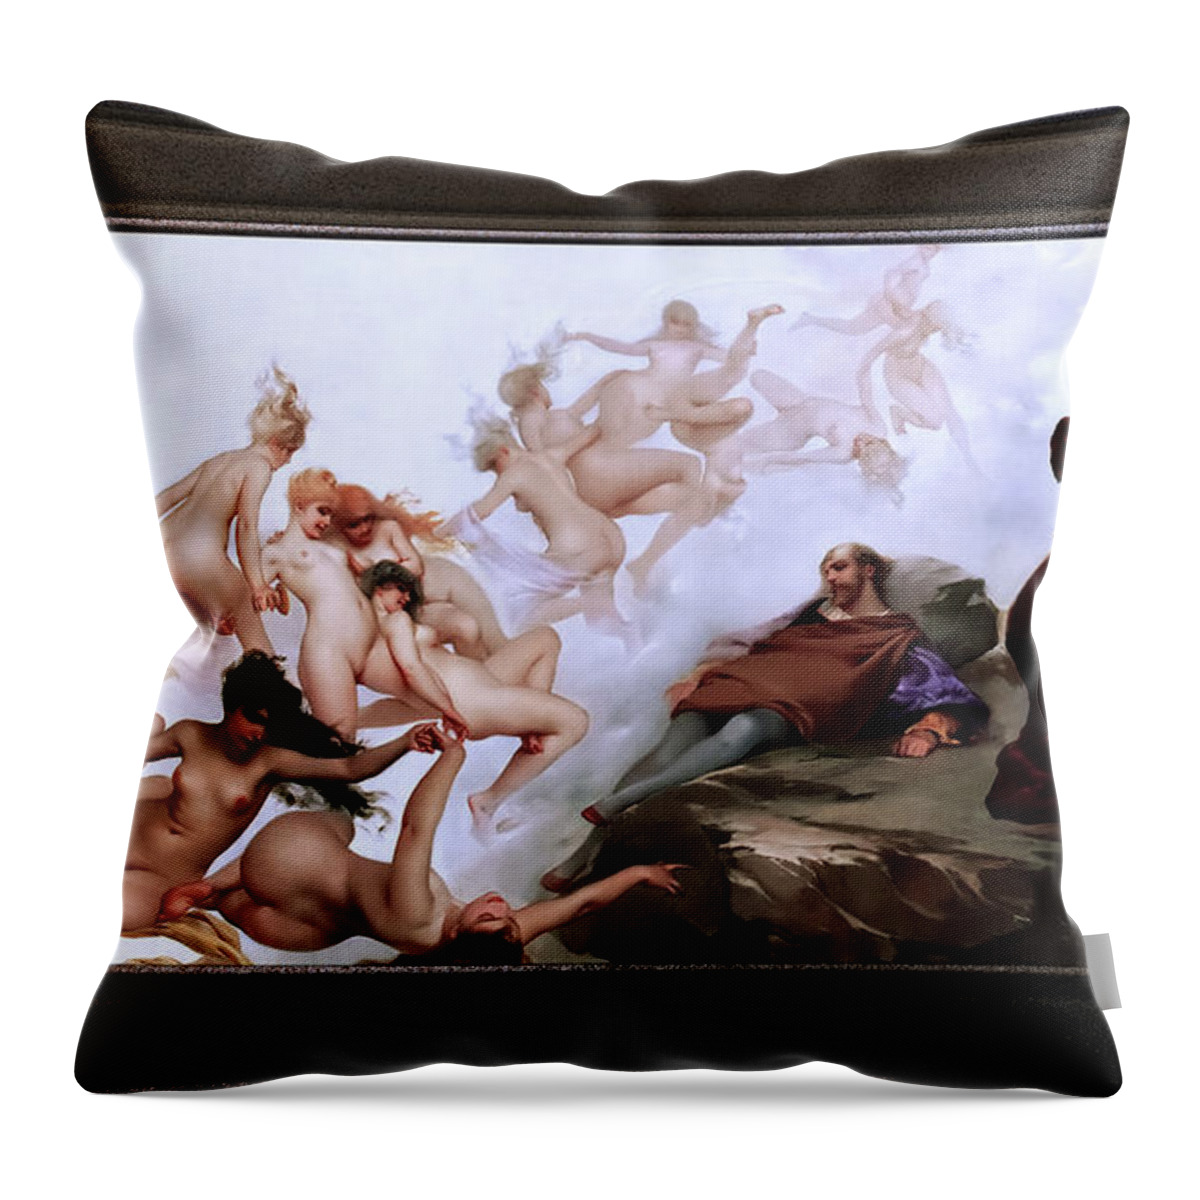 Faust's Dream Throw Pillow featuring the painting Faust's Dream by Luis Ricardo Falero Old Masters Classical Fine Art Reproduction by Rolando Burbon